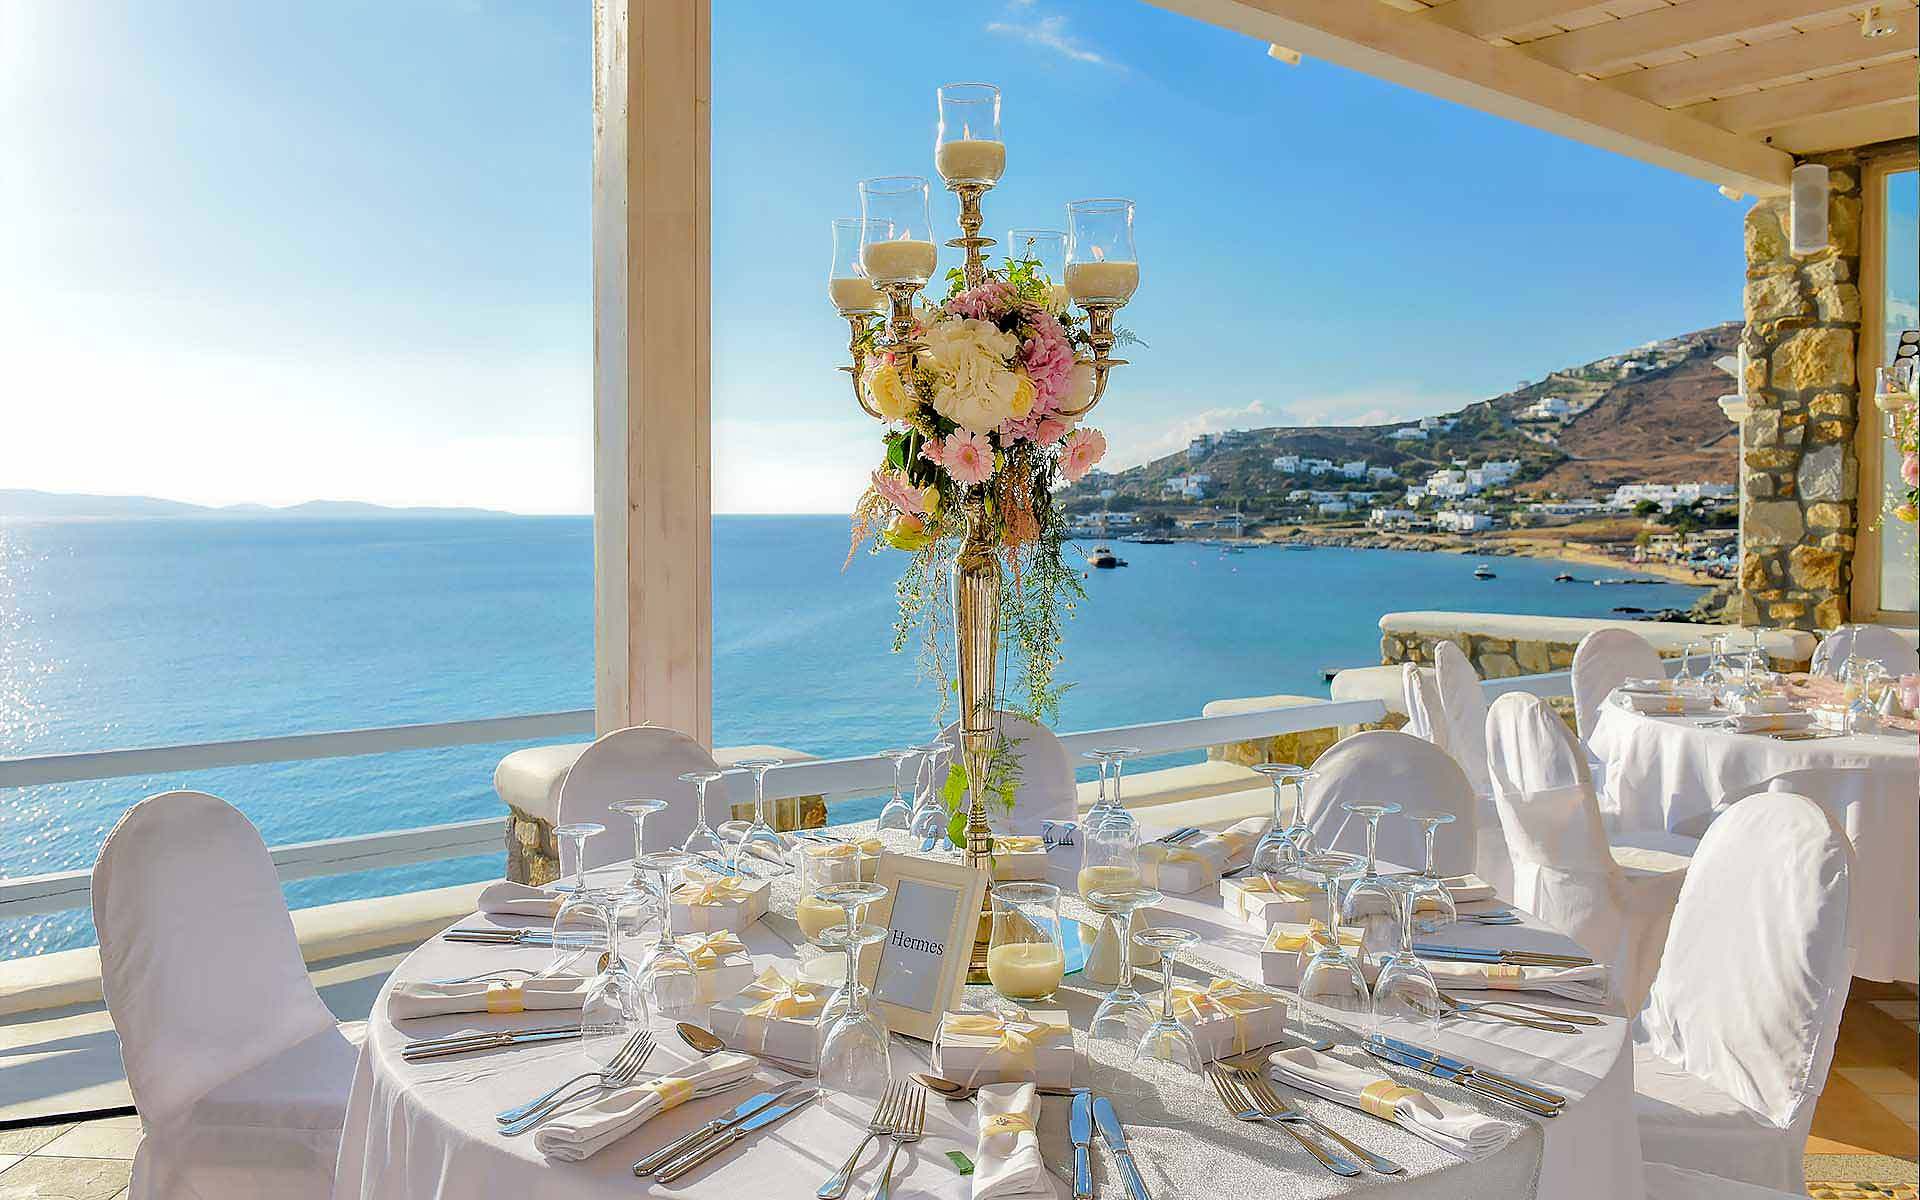 Candelabra-As-A-Centerpiece-With-The-Sea-Of-Mykonos-As-A-Background